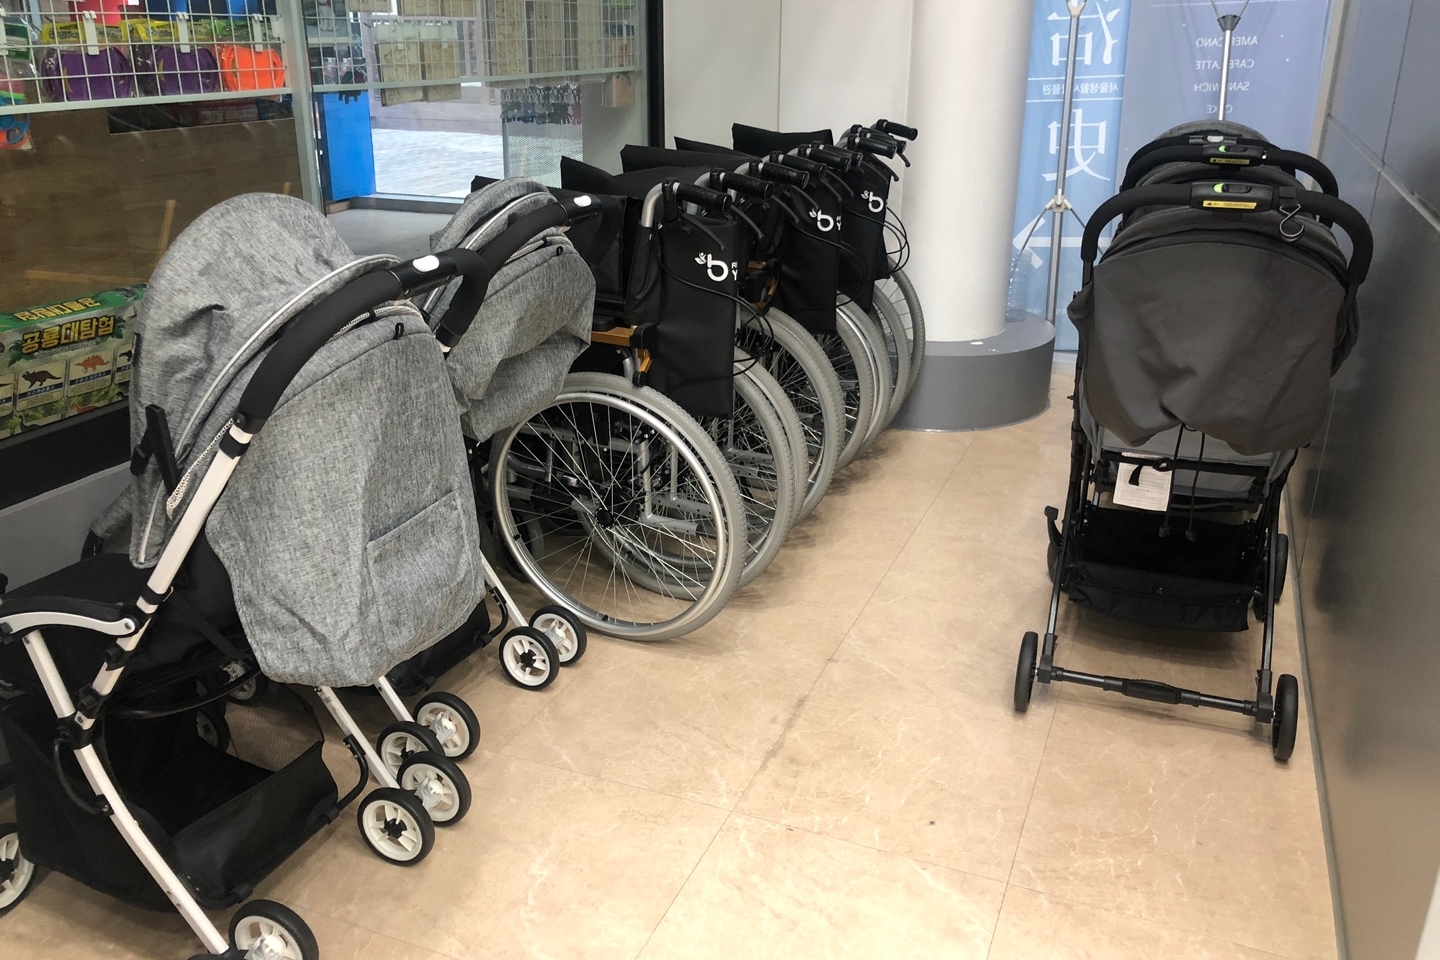 Information board/ Information desk 0 : Neatly arranged strollers and wheelchairs for rental
